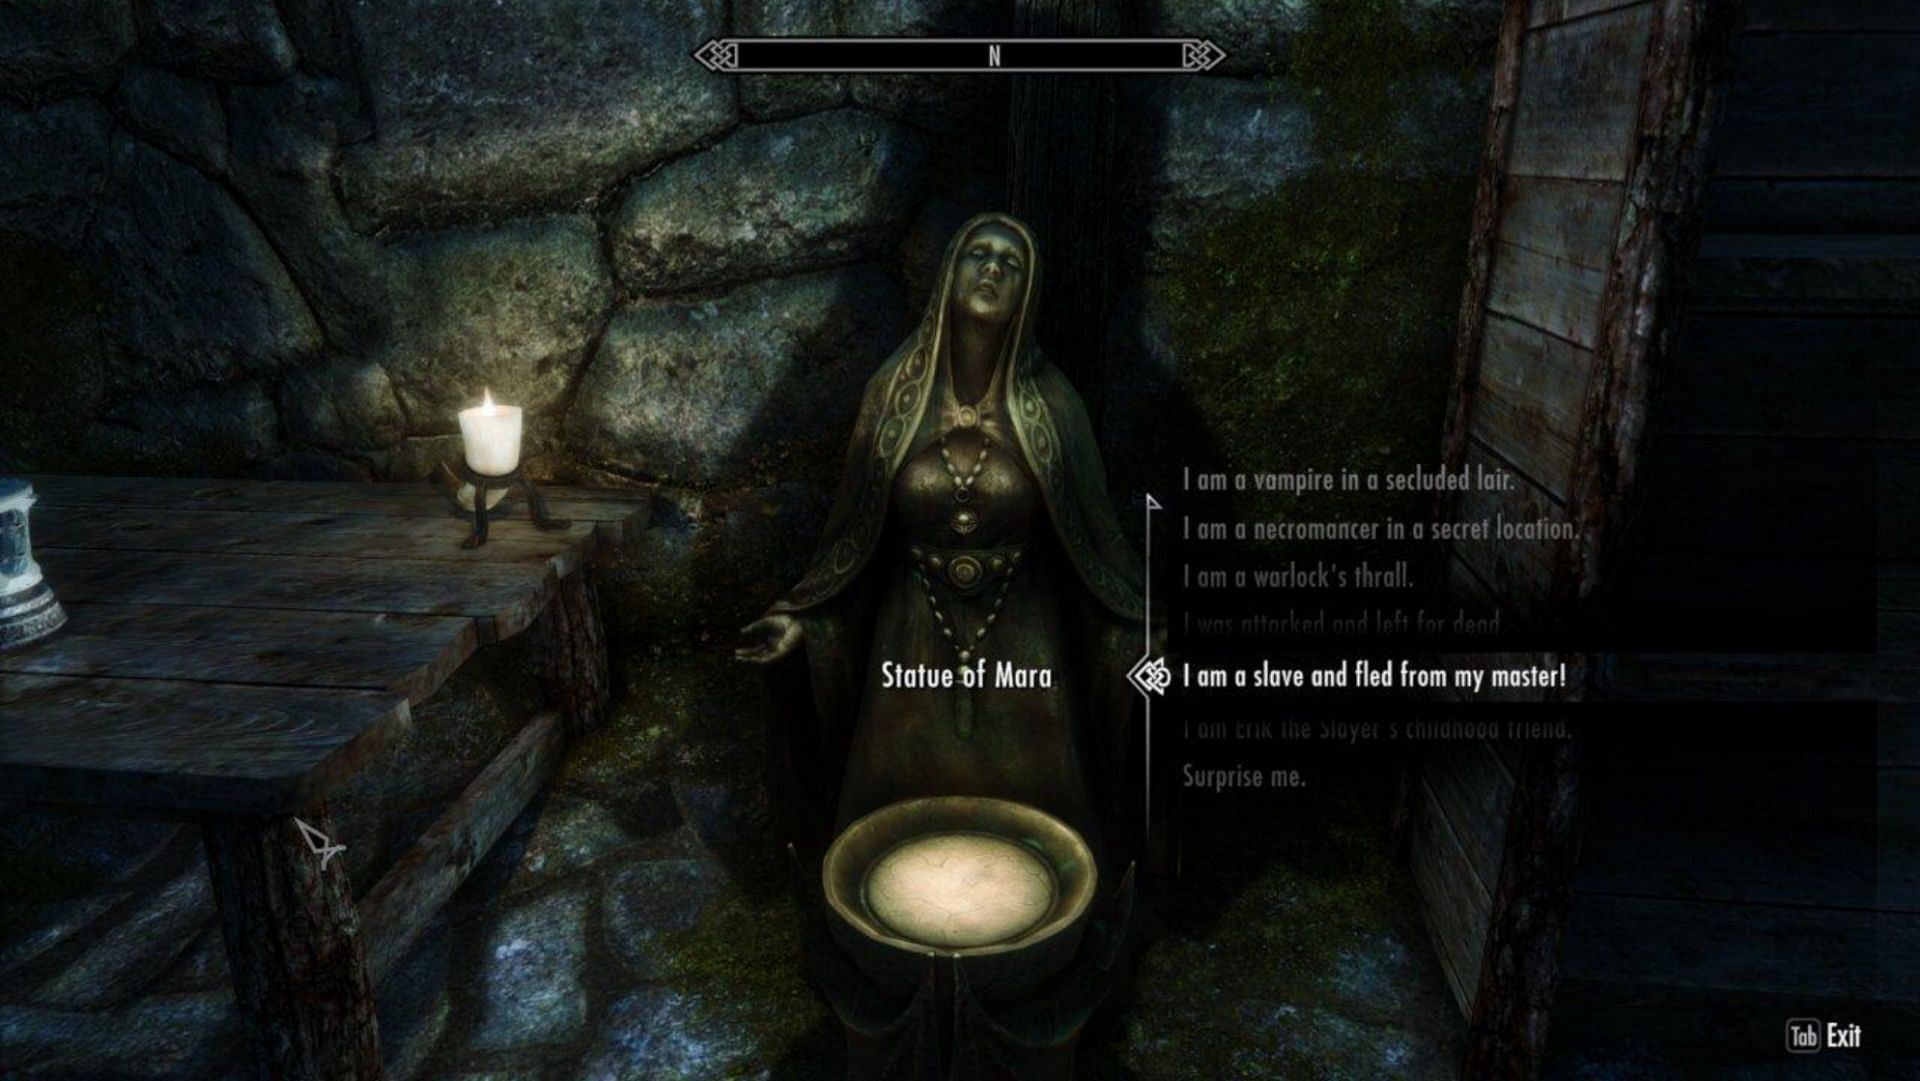 There are thousands of Skyrim mods to choose from, and here are some of the best.